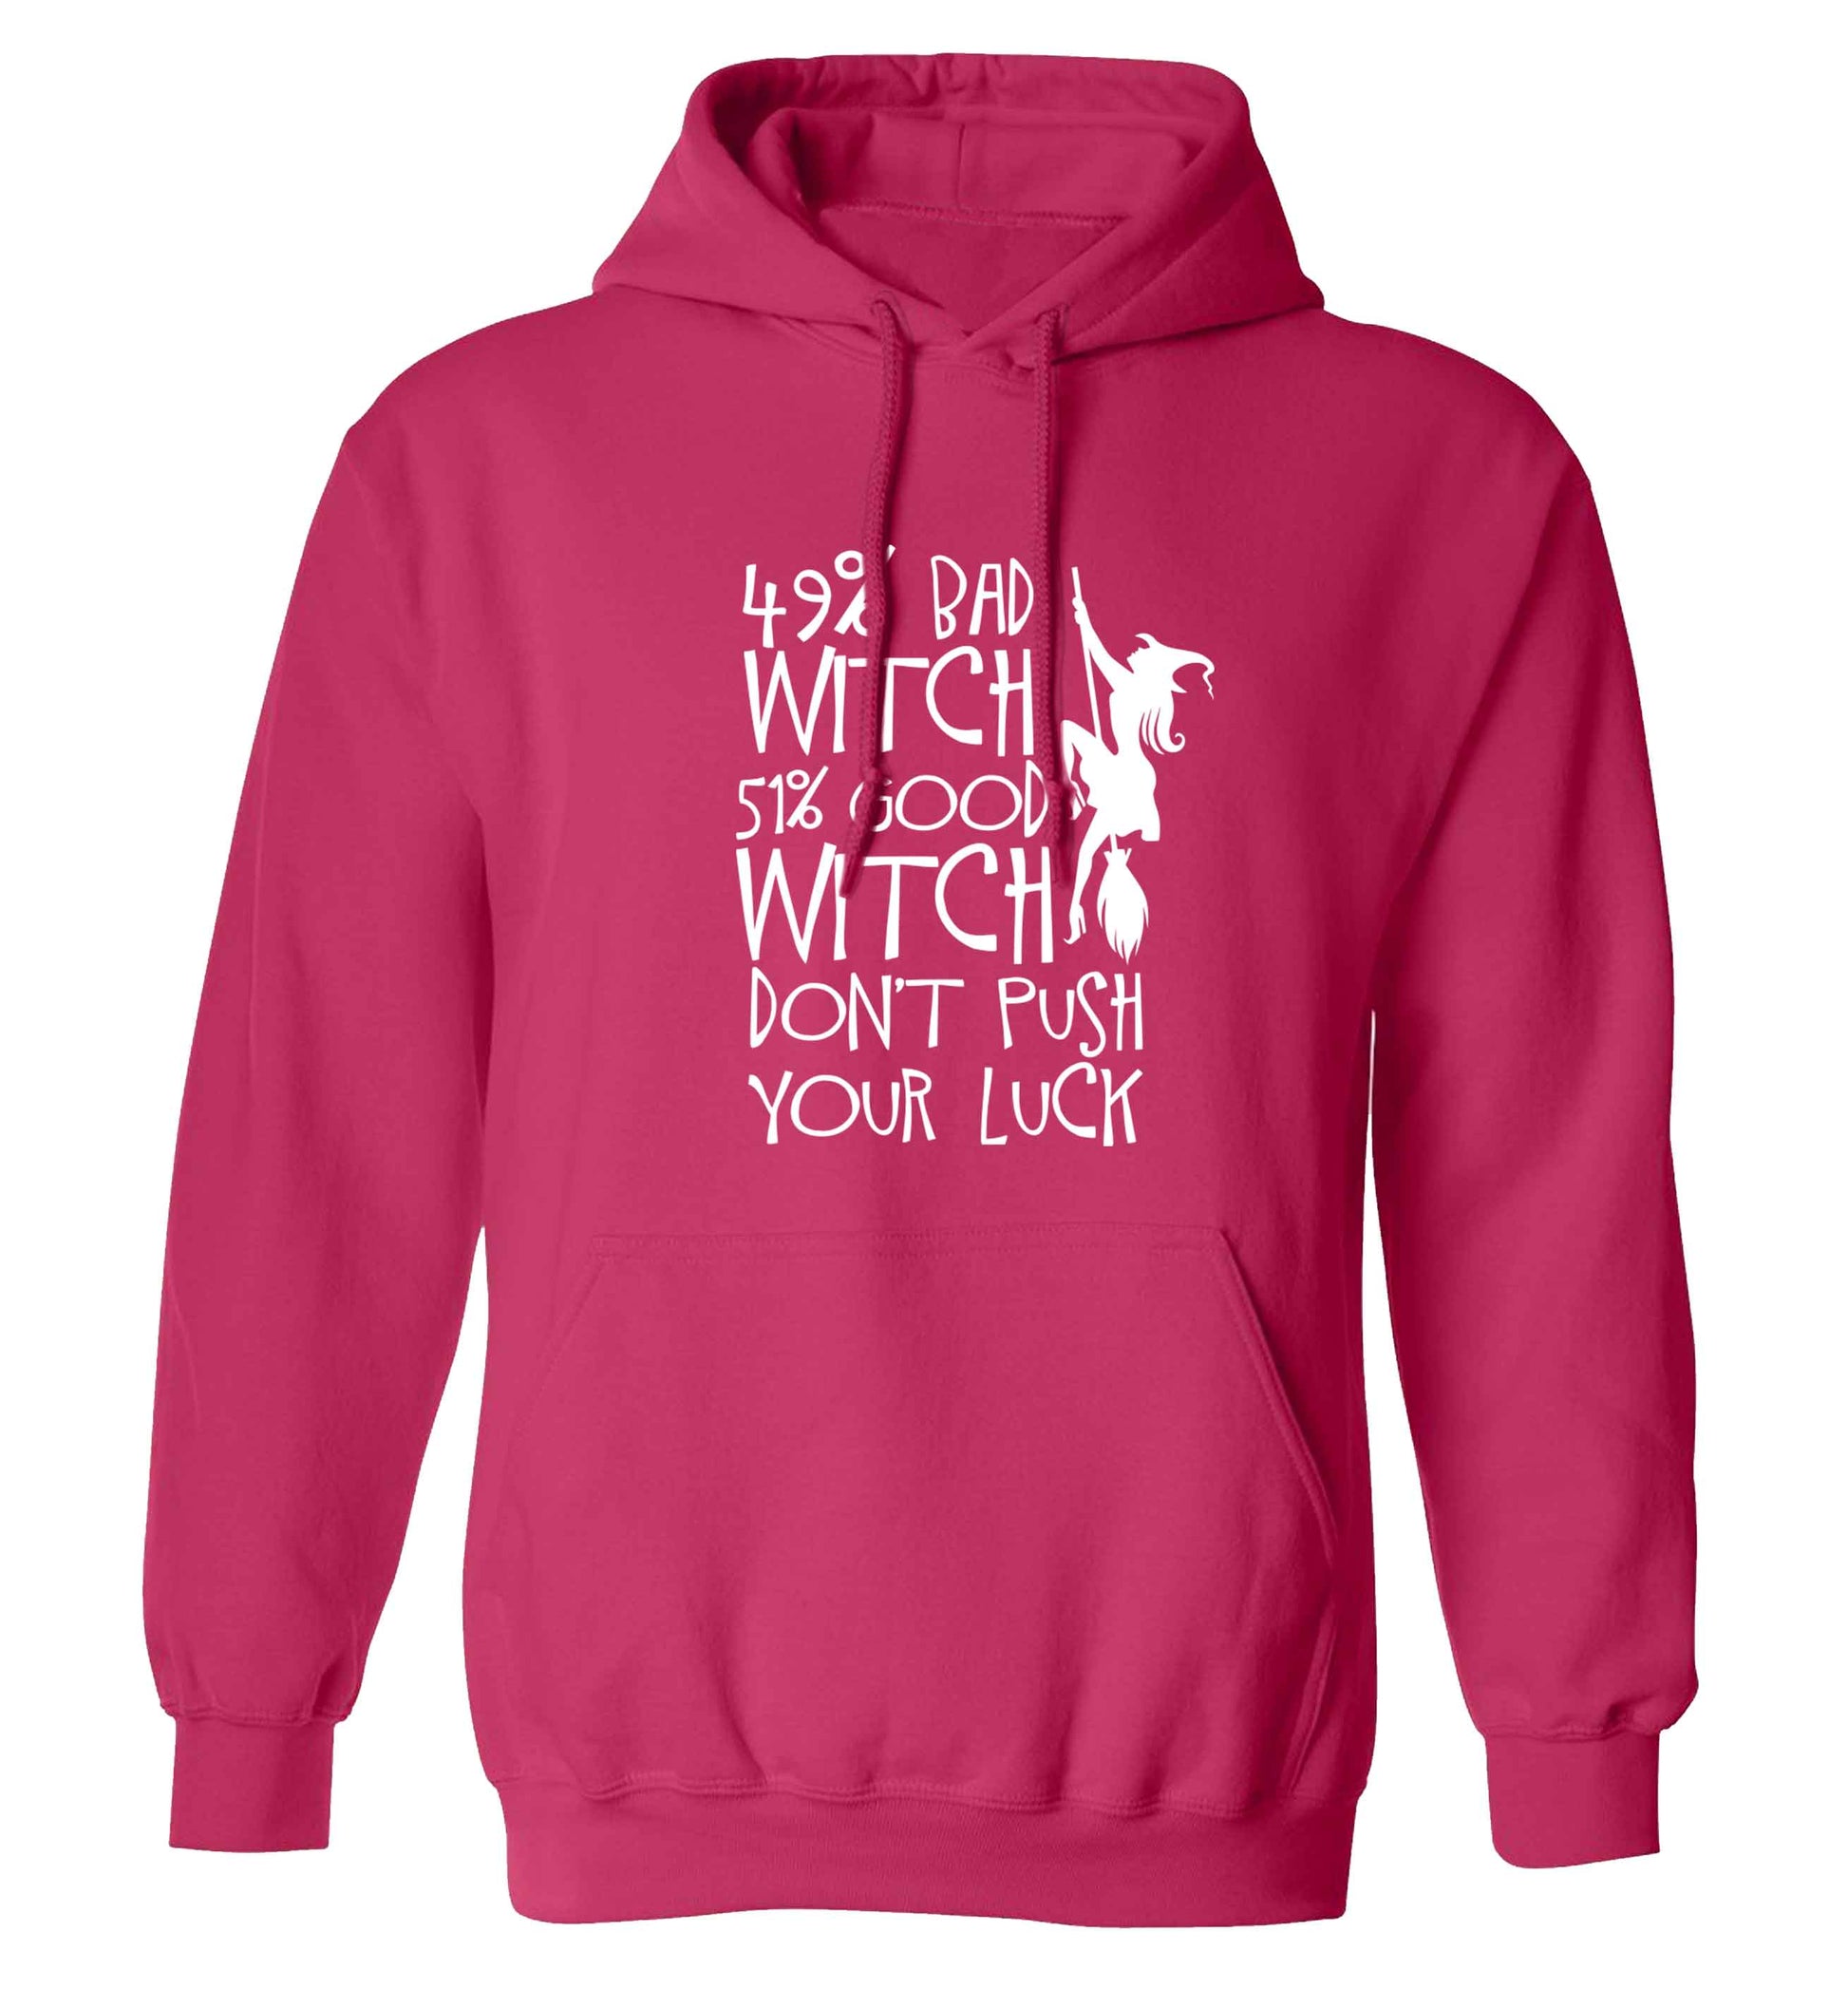 49% bad witch 51% good witch don't push your luck adults unisex pink hoodie 2XL